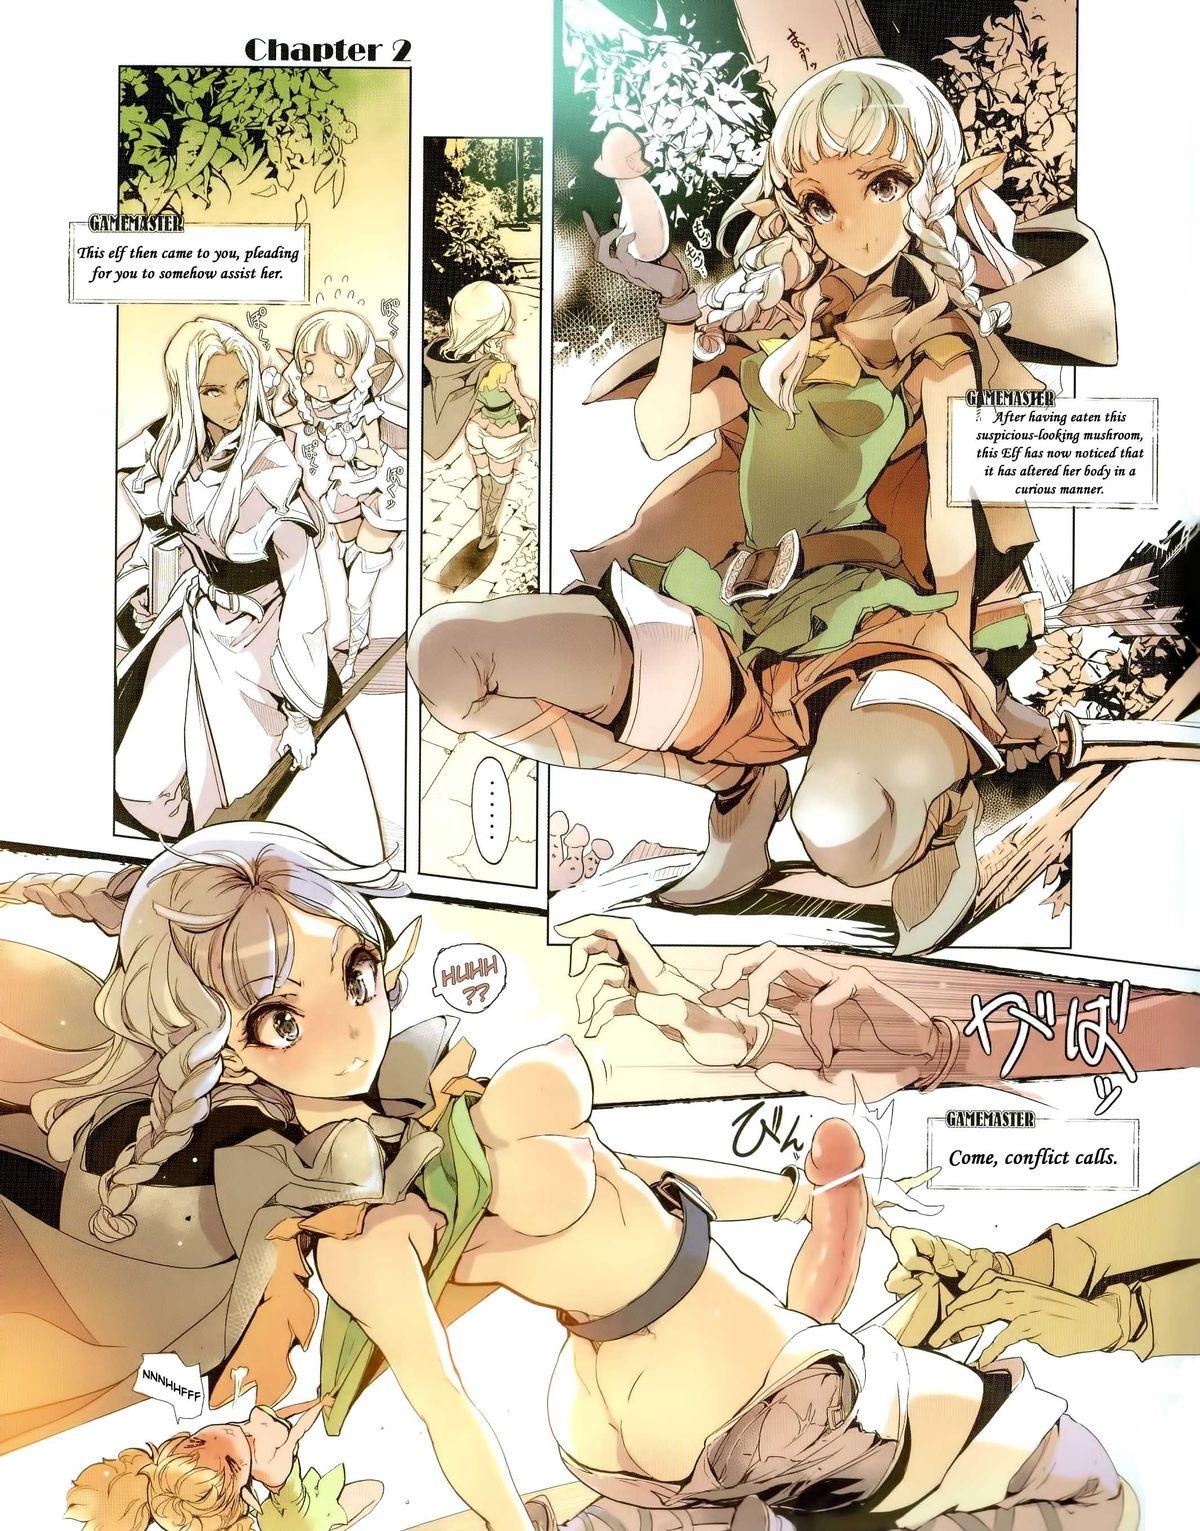 Blond D&! -DRAGON & ! - Dragons crown Shoplifter - Page 5